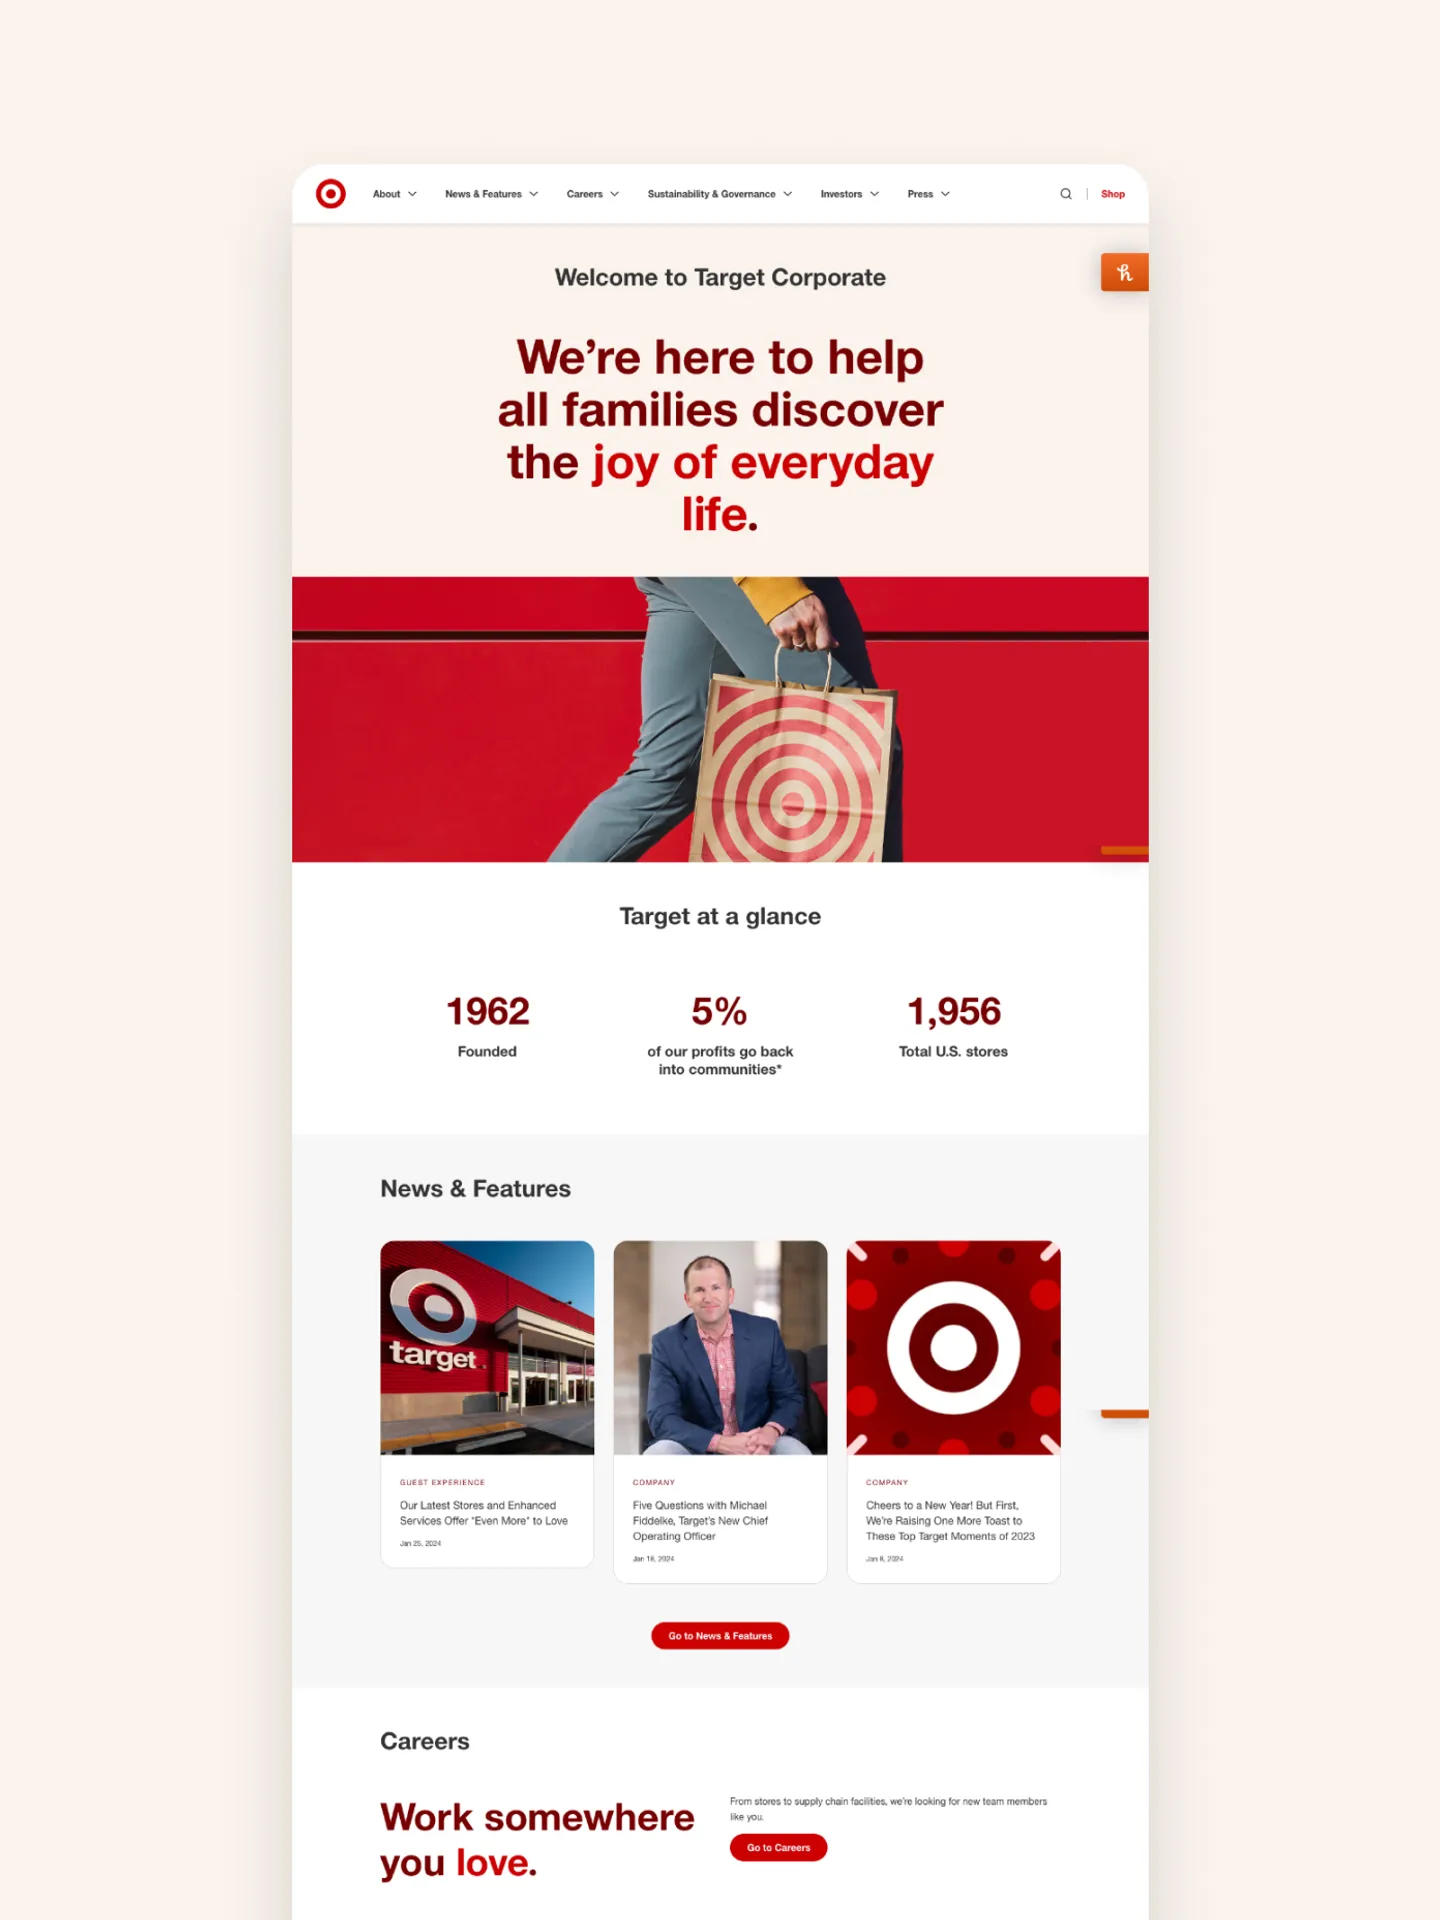 Web page design of the Target corporate website